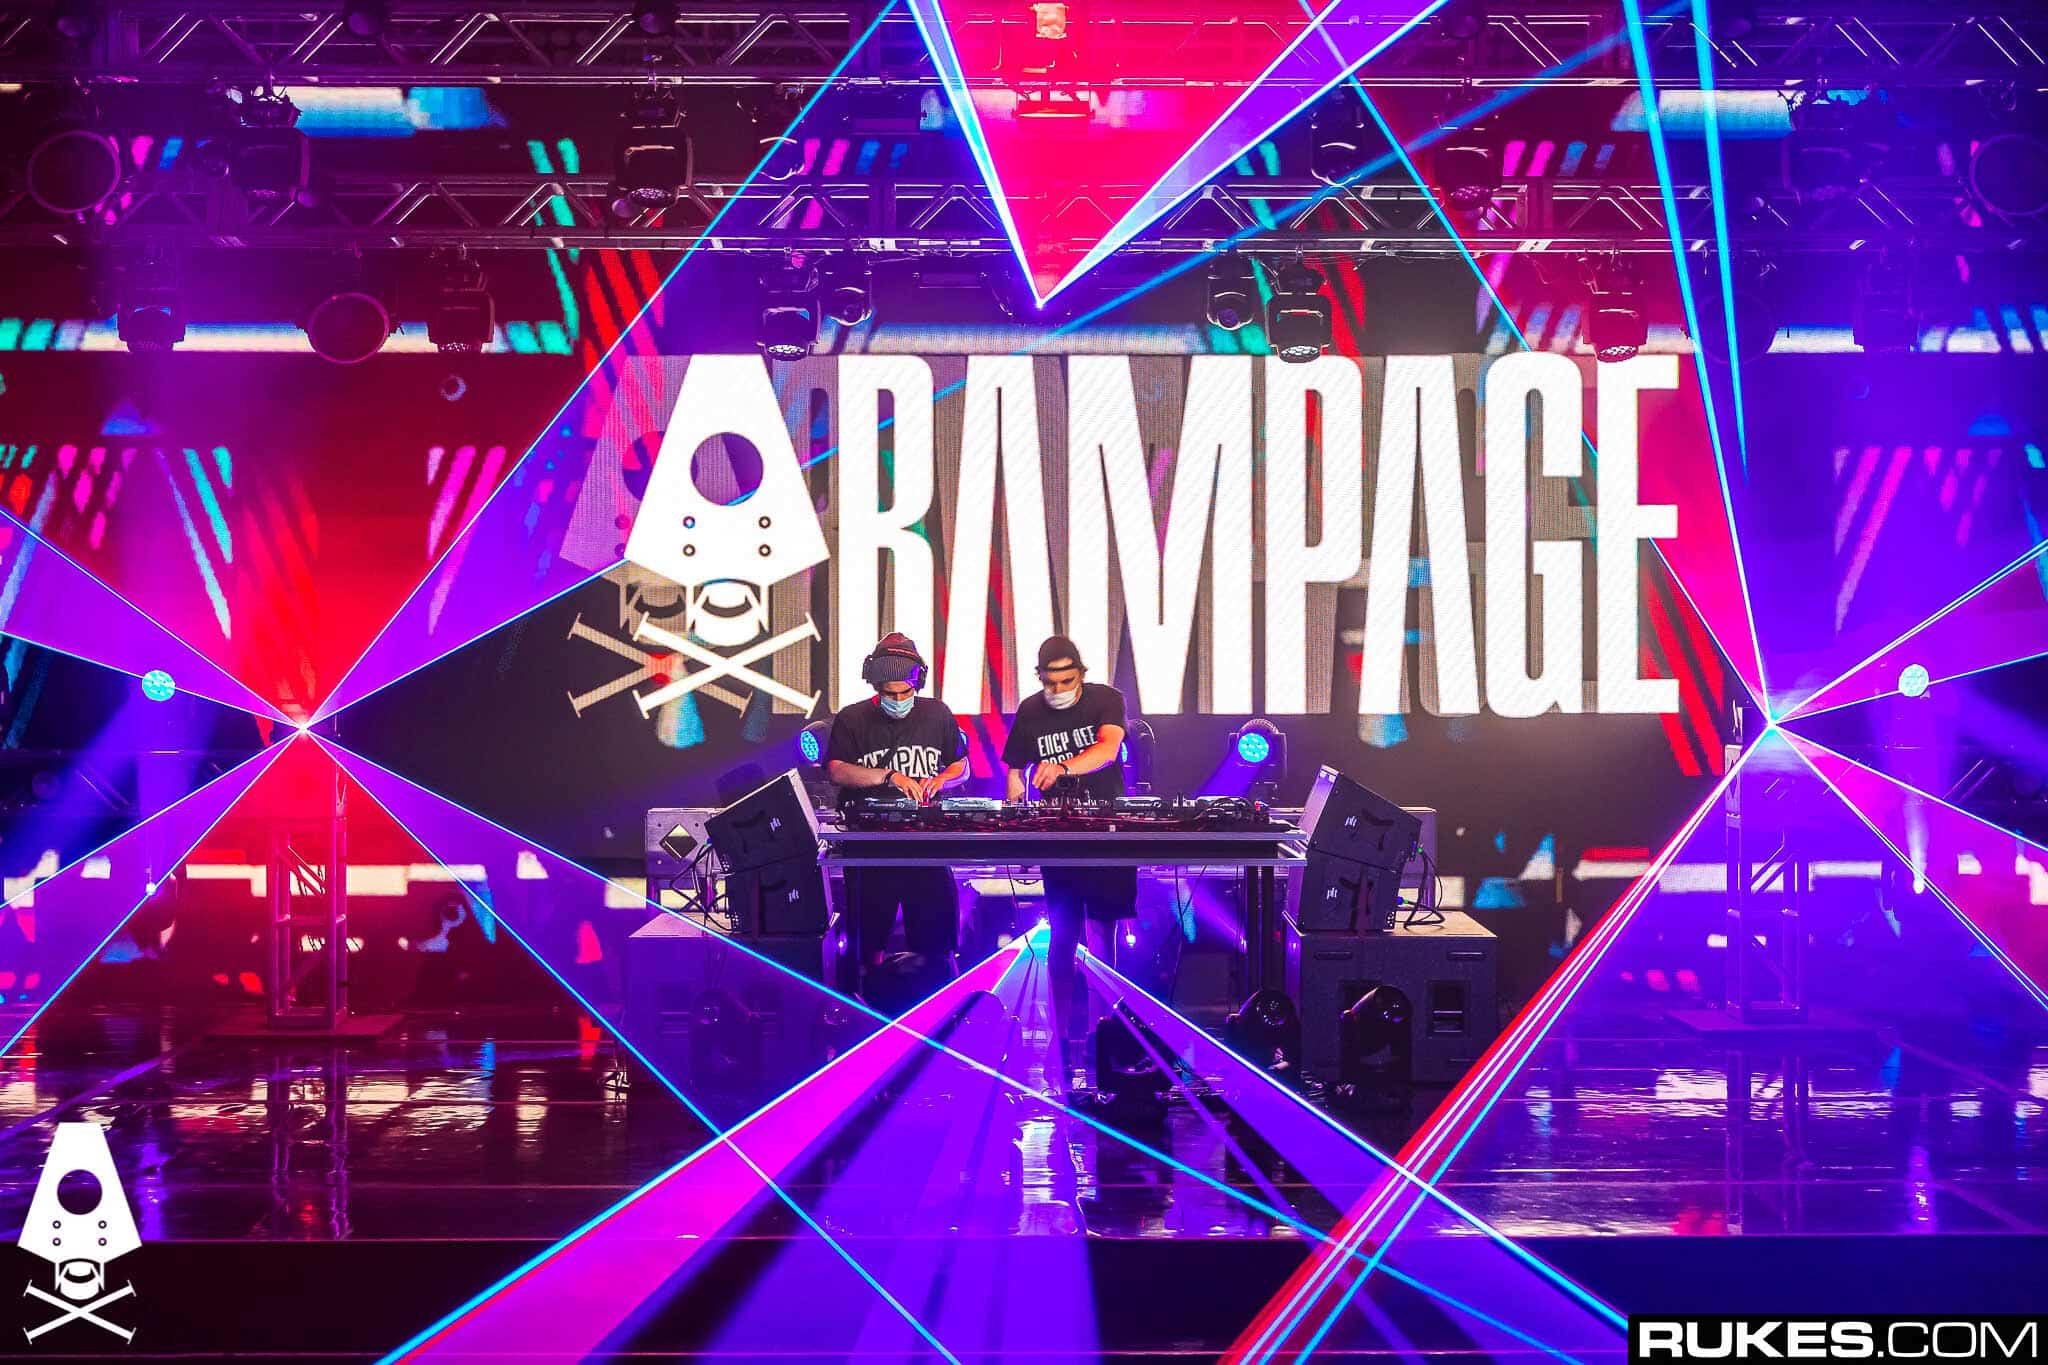 Rampage 2020 Goes Virtual | Incredible Online Laser Show